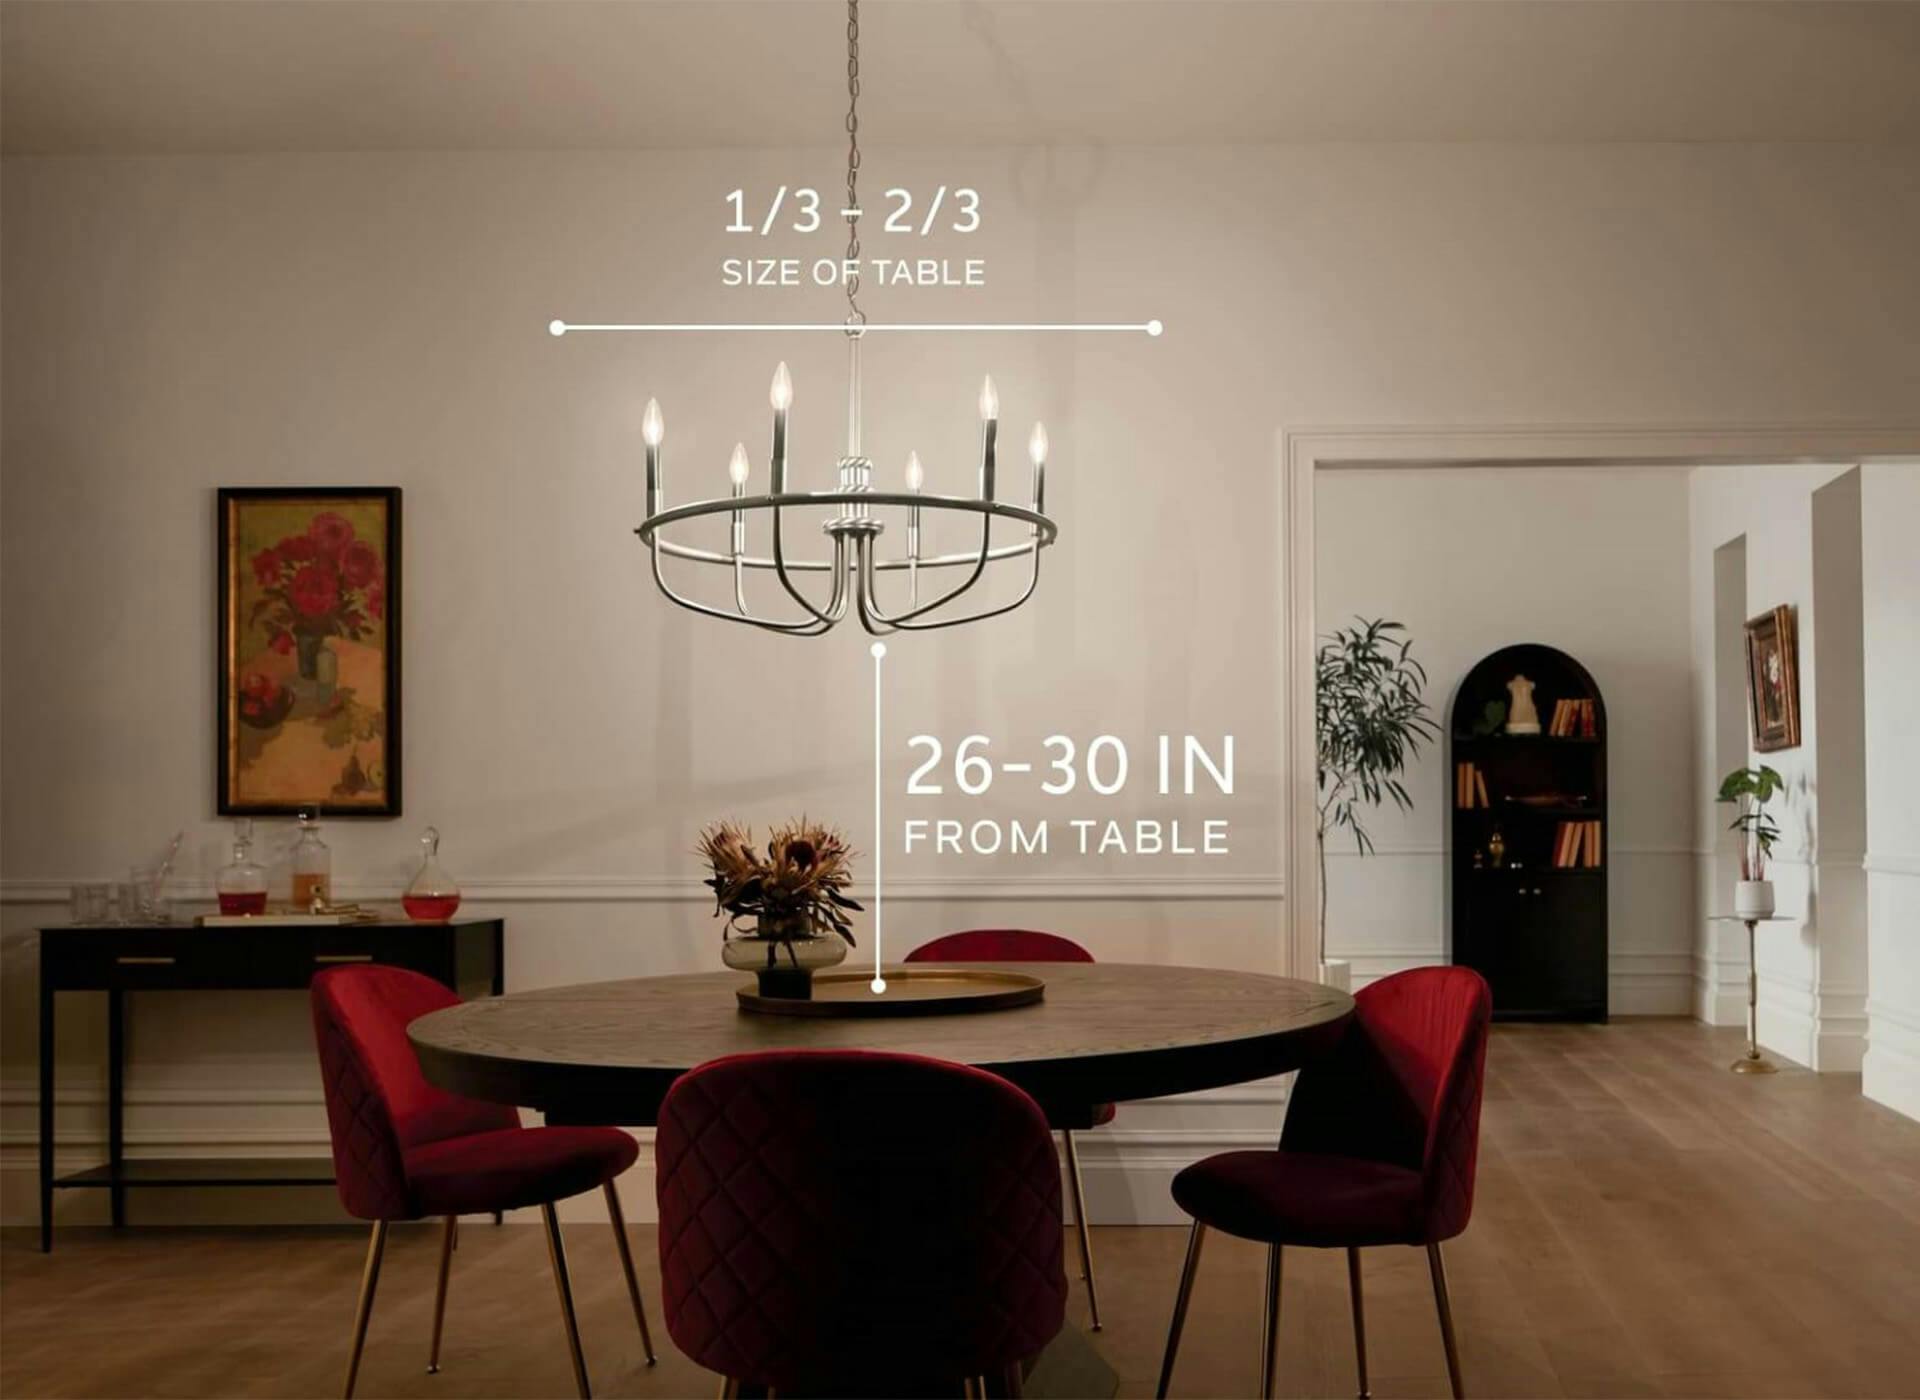 Dining room example with measurements. 1/3-2/3 chandelier size of table horizontally and chandelier above the table 26-30 inches